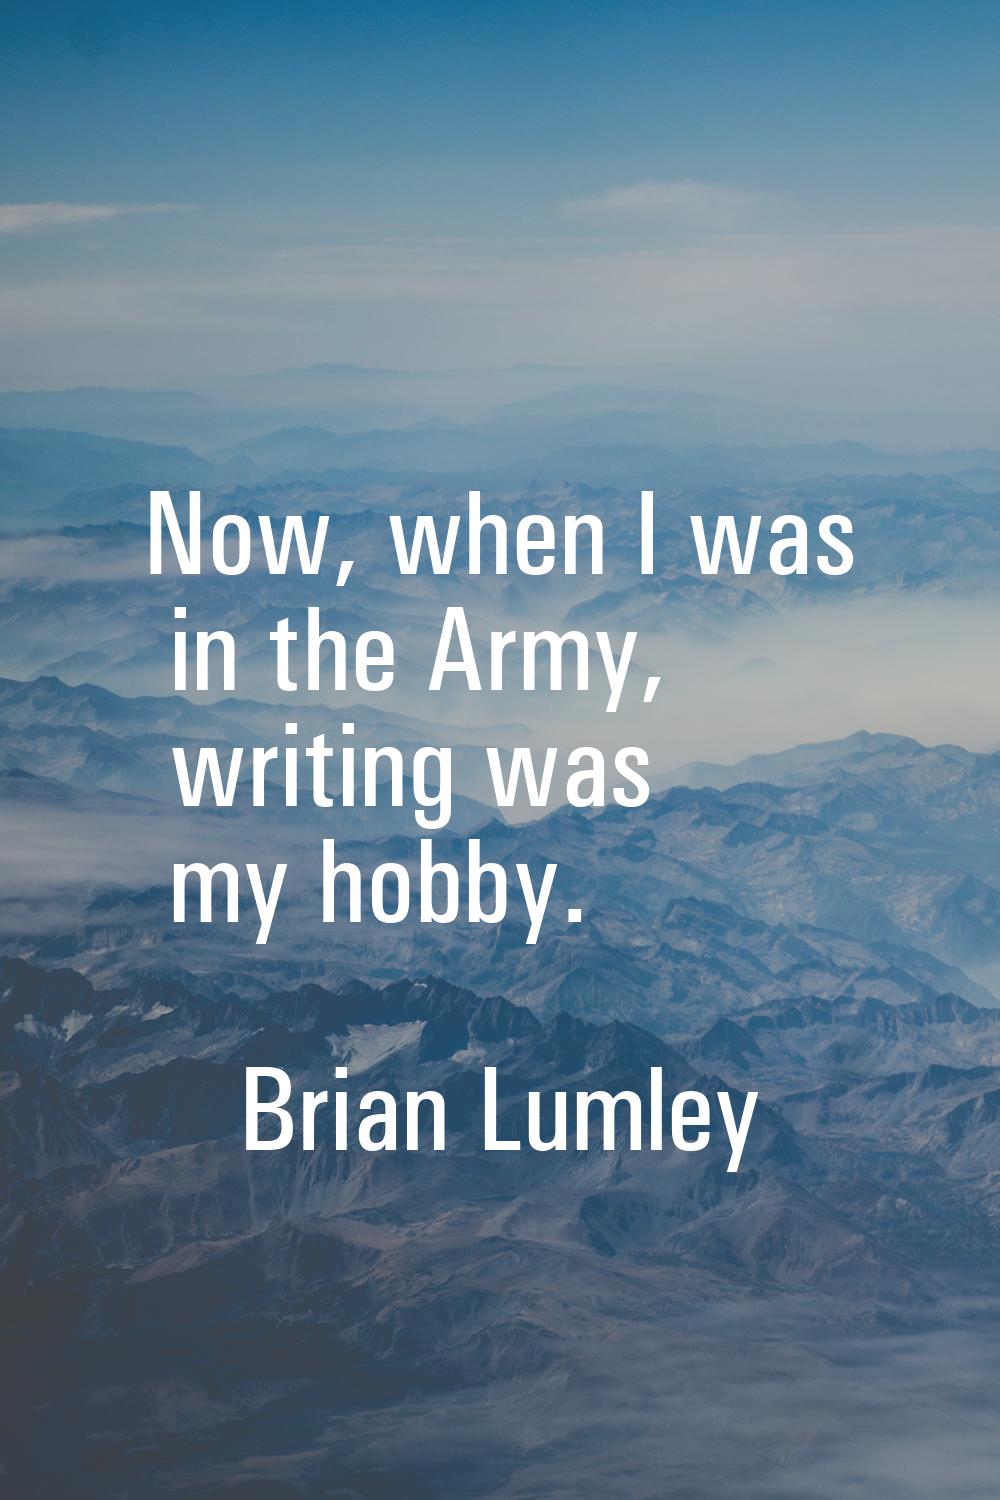 Now, when I was in the Army, writing was my hobby.